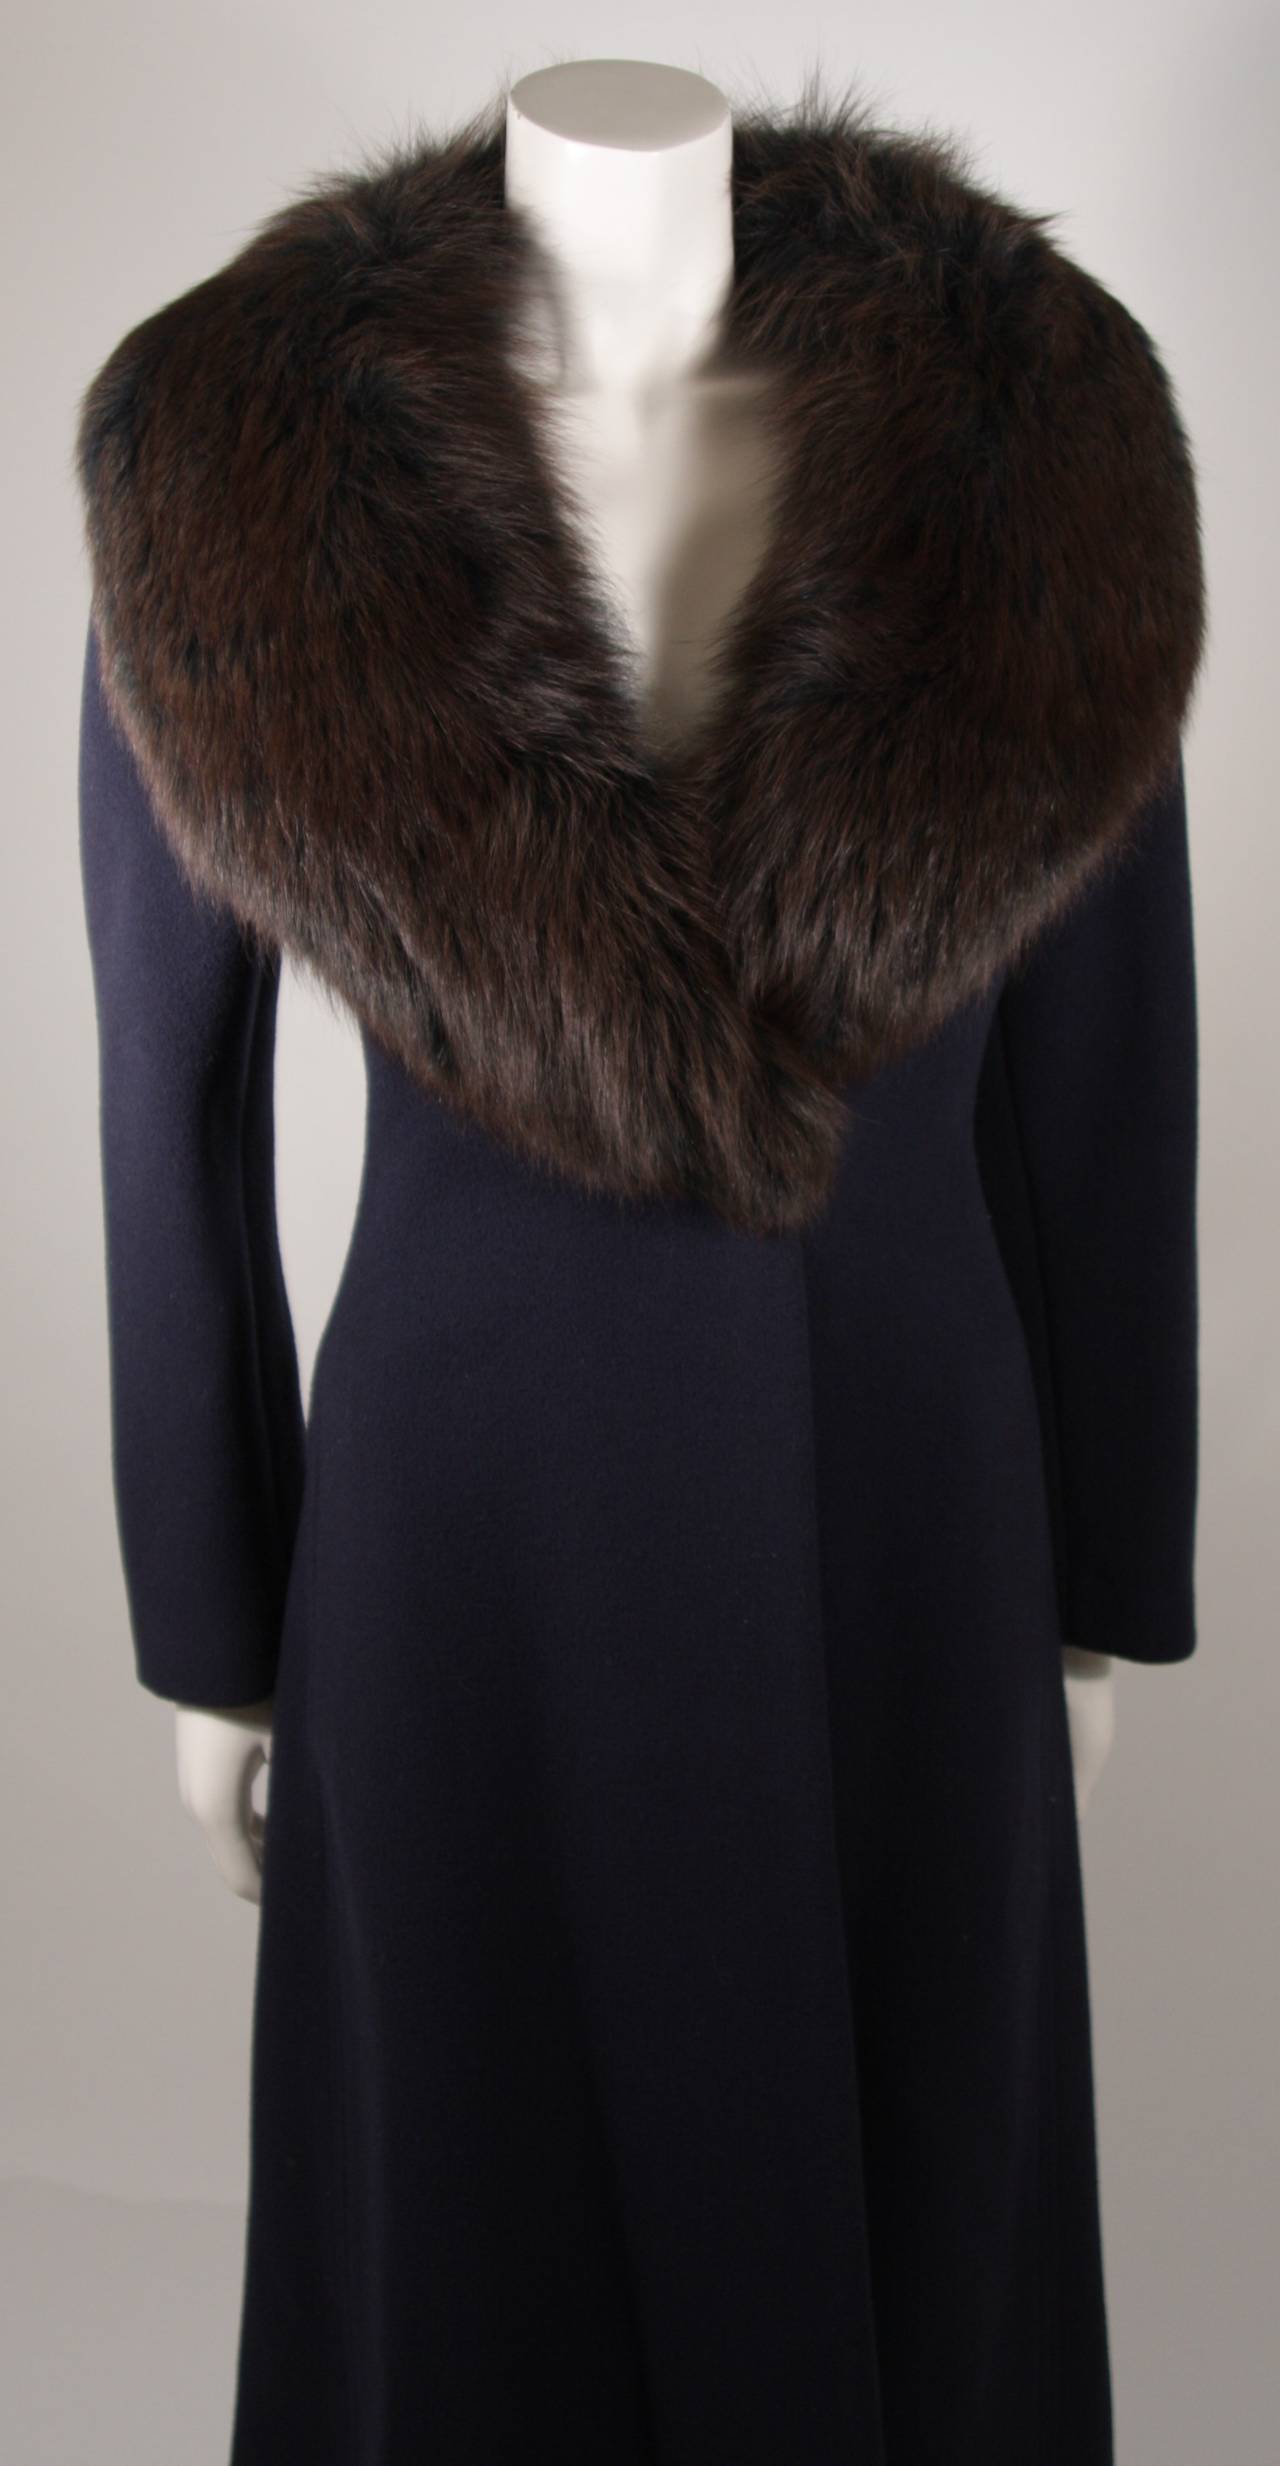 Black Pauline Trigere Navy Wool Coat with Blue and Brown Fox Collar Size